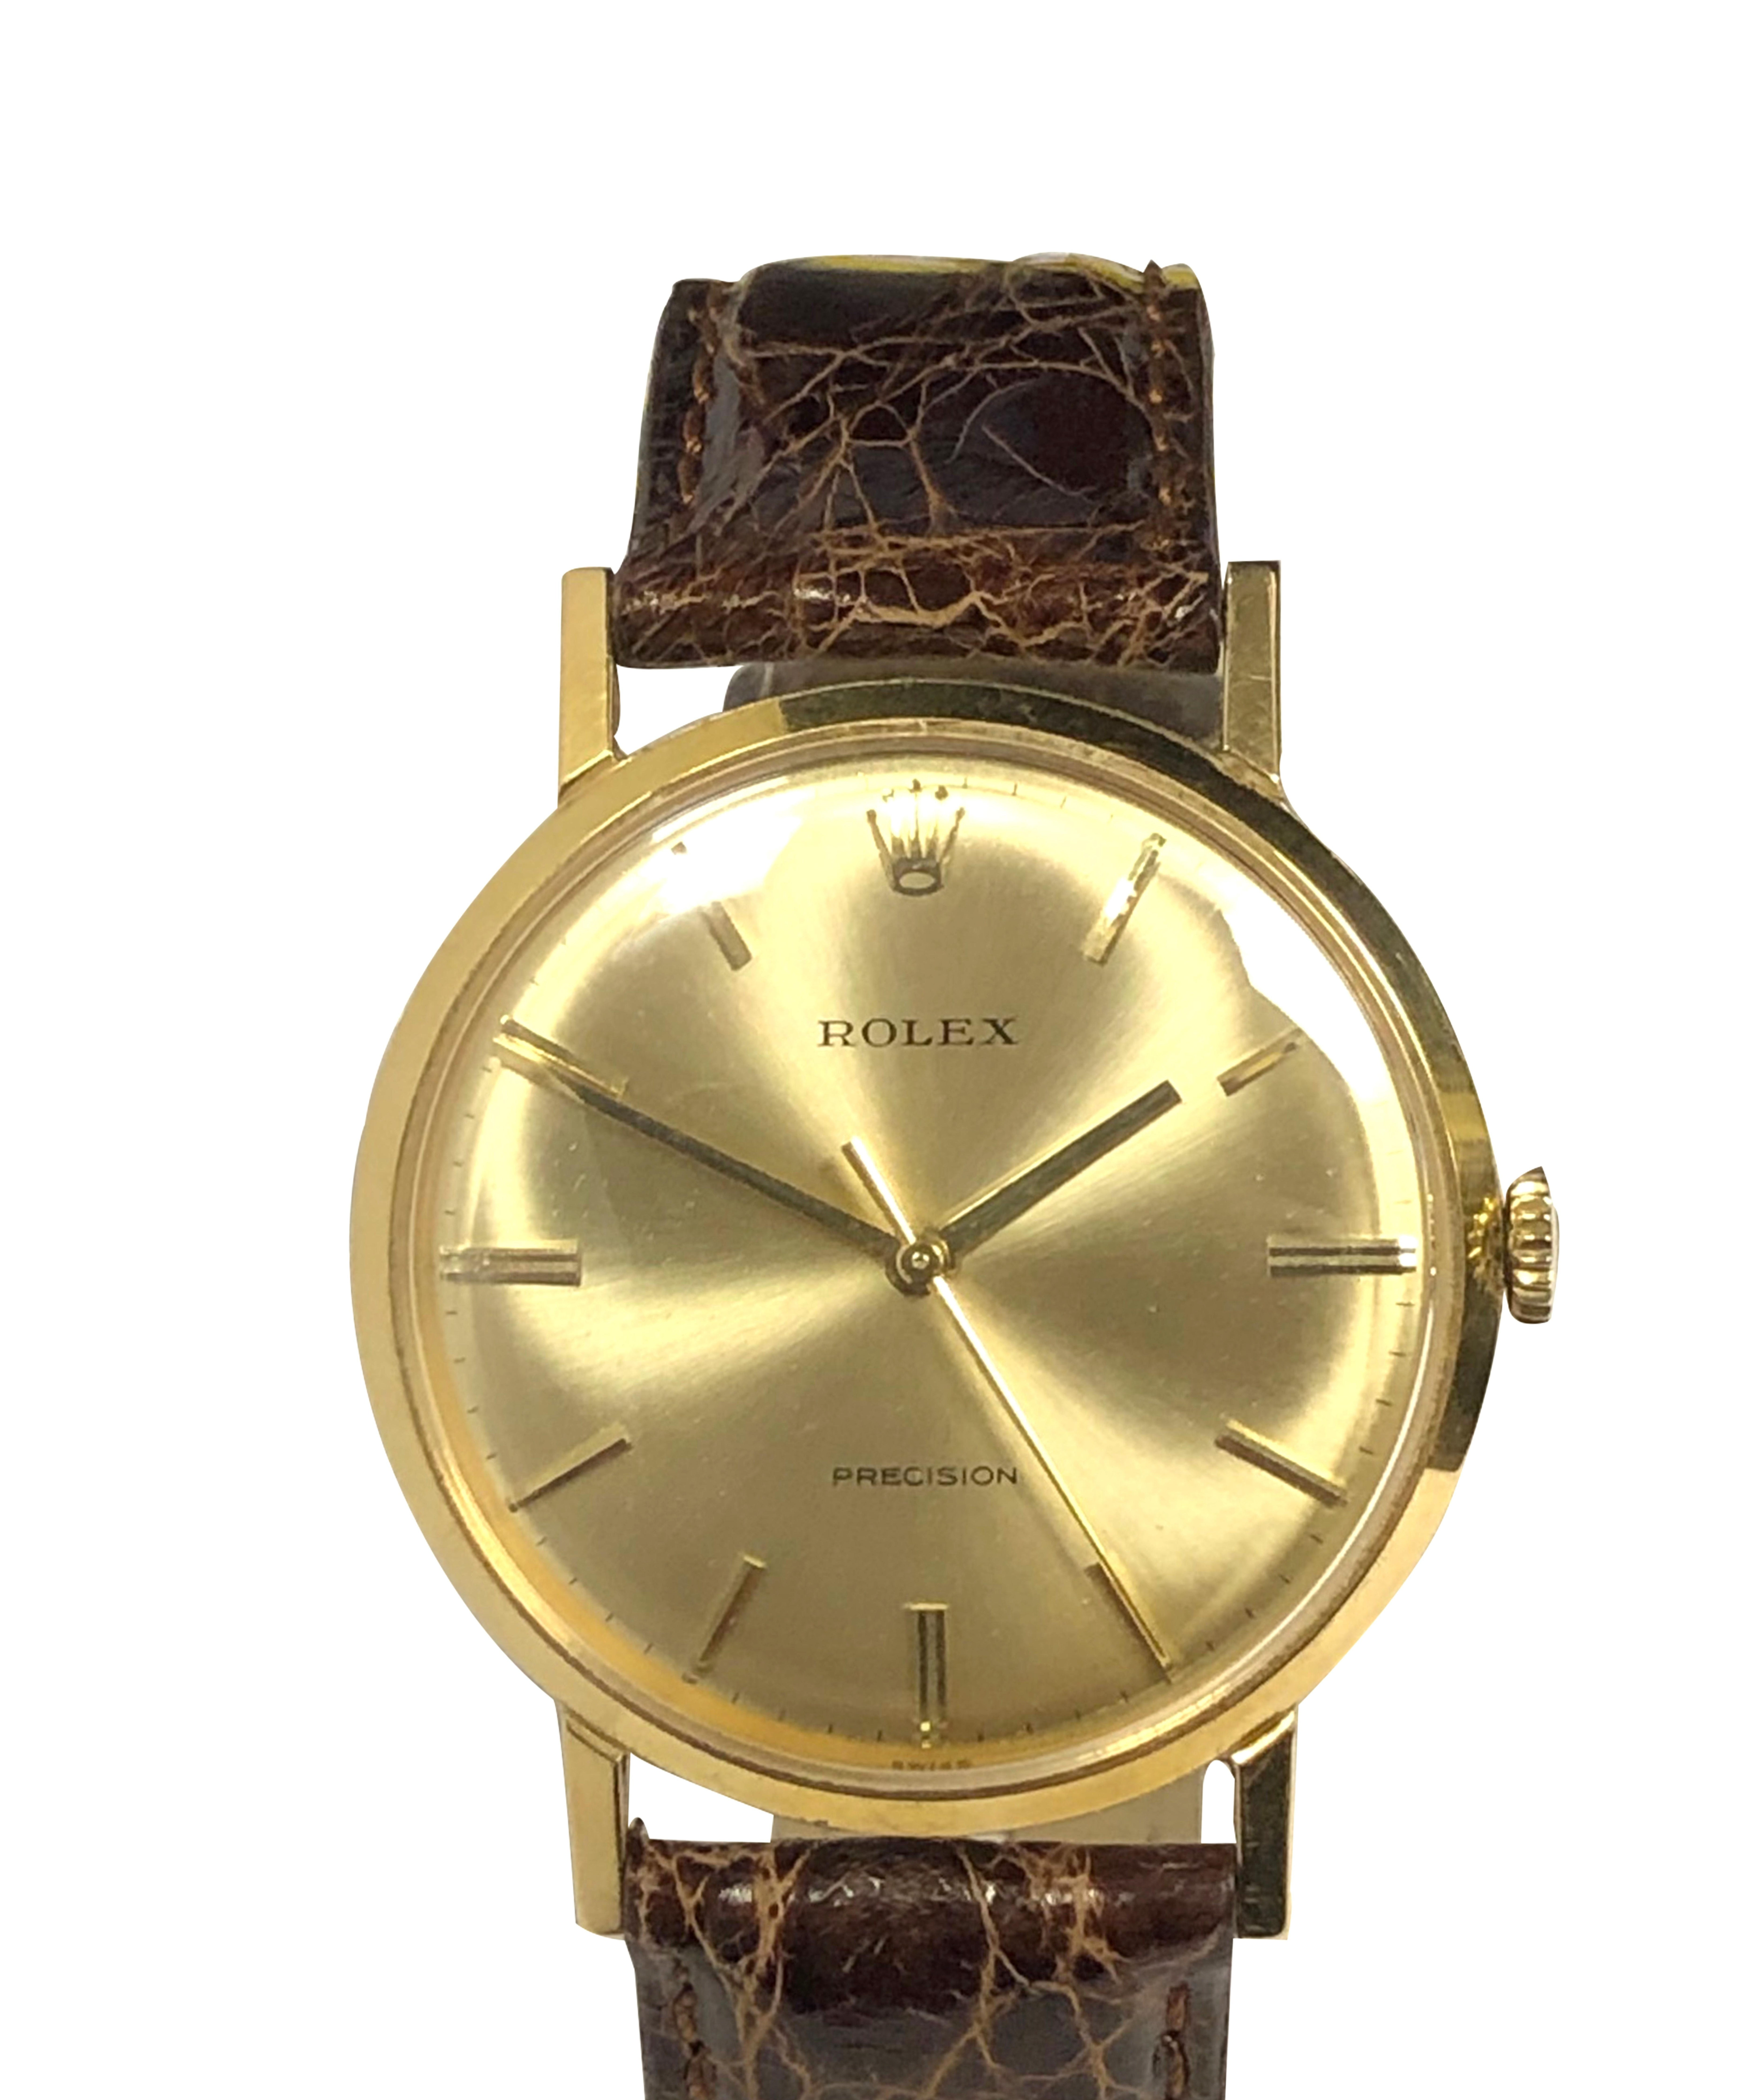 Circa 1950 Rolex Precision, 34 M.M. 18K Yellow Gold 2 Piece case. 17 jewel Nickle Lever mechanical wind movement. original Gold Satin dial with Raised Gold markers and a sweep seconds hand. New Brown Croco padded strap with original Rolex Gold